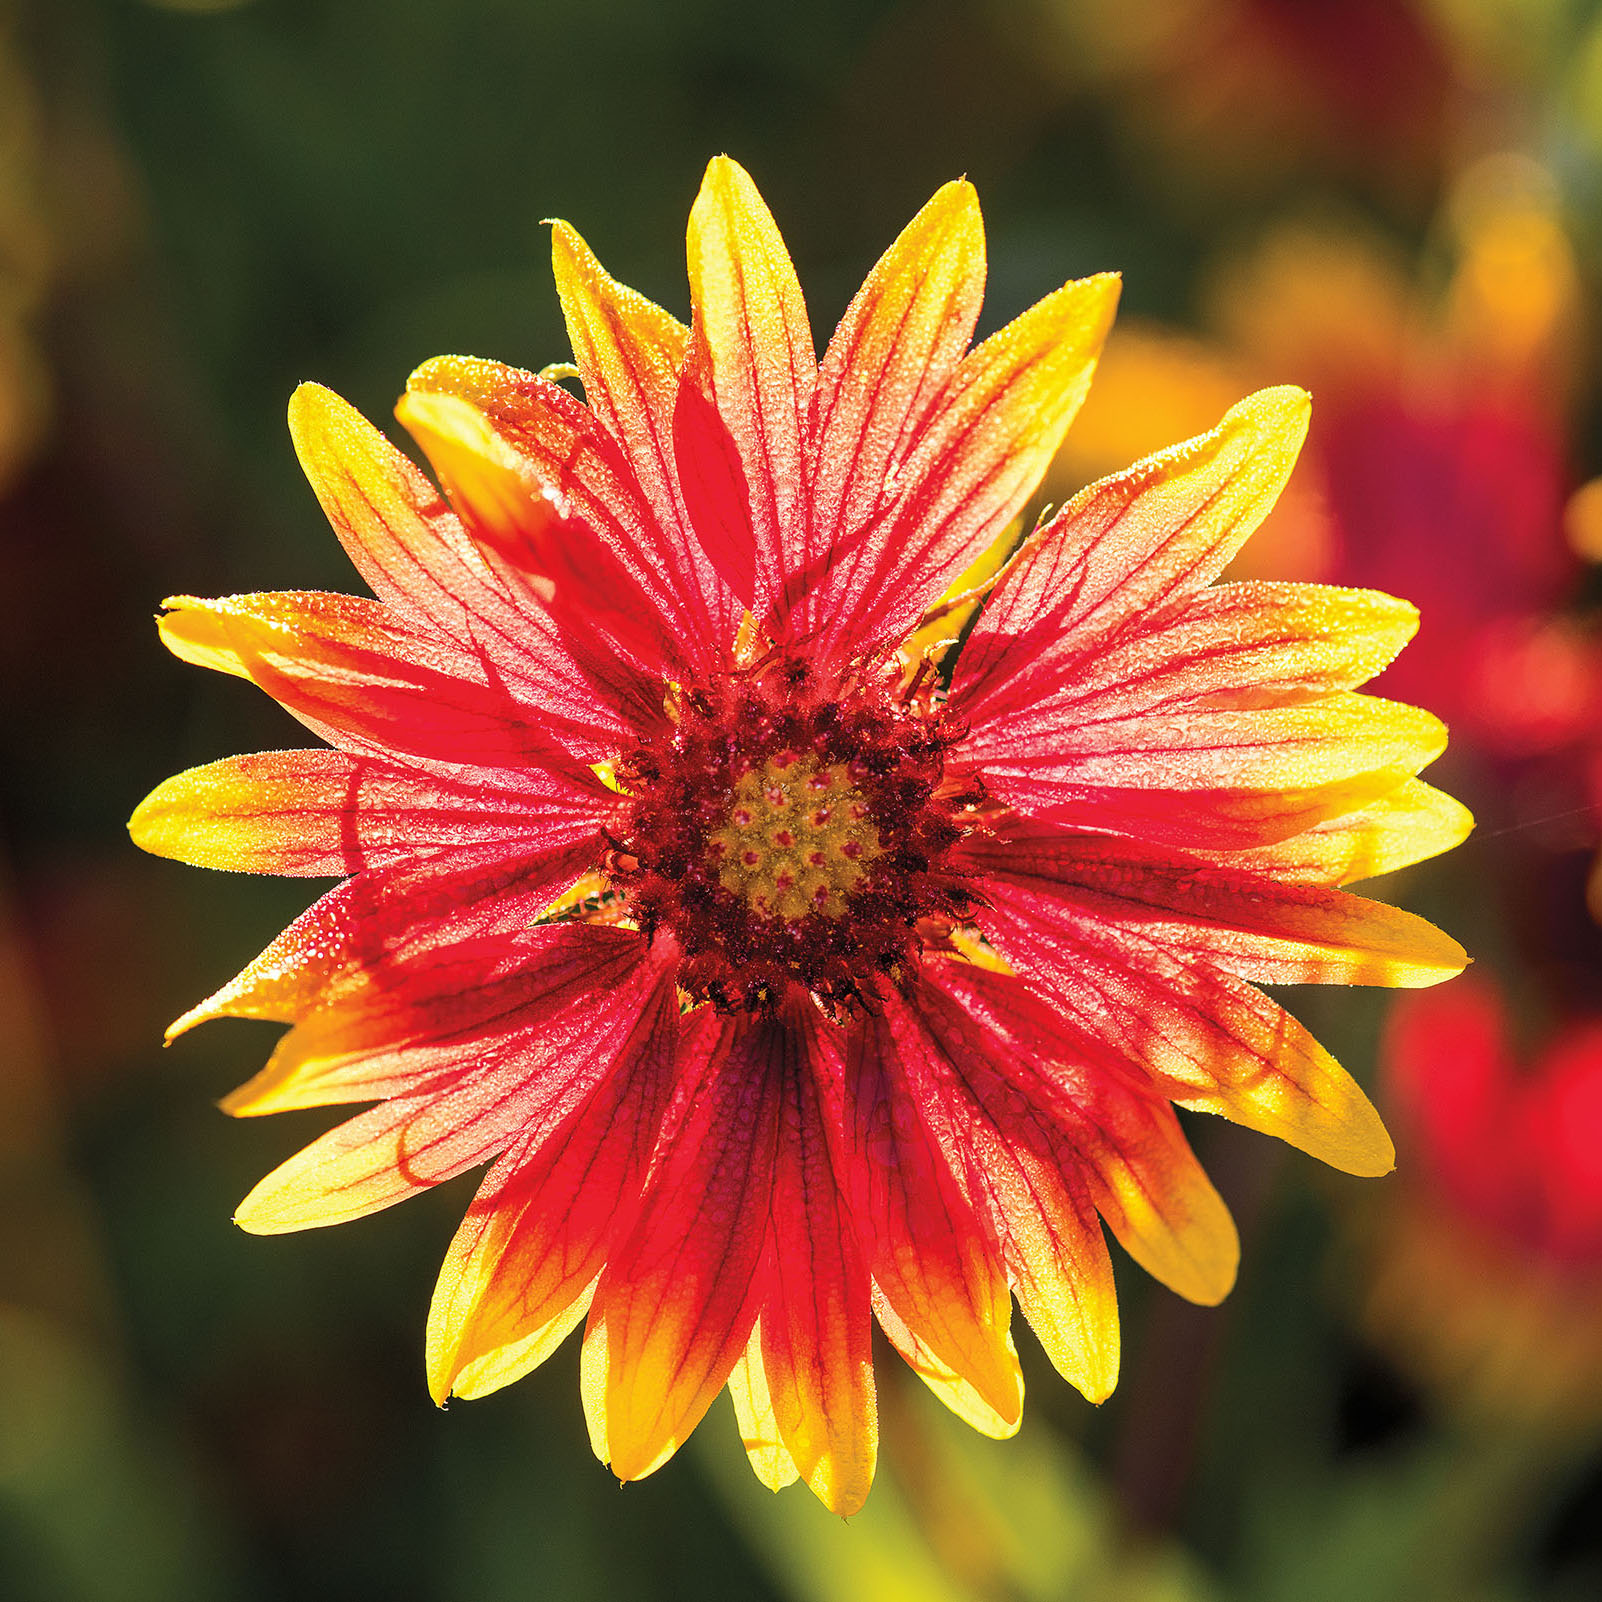 A bright red, orange, and yellow wildflower on a green background